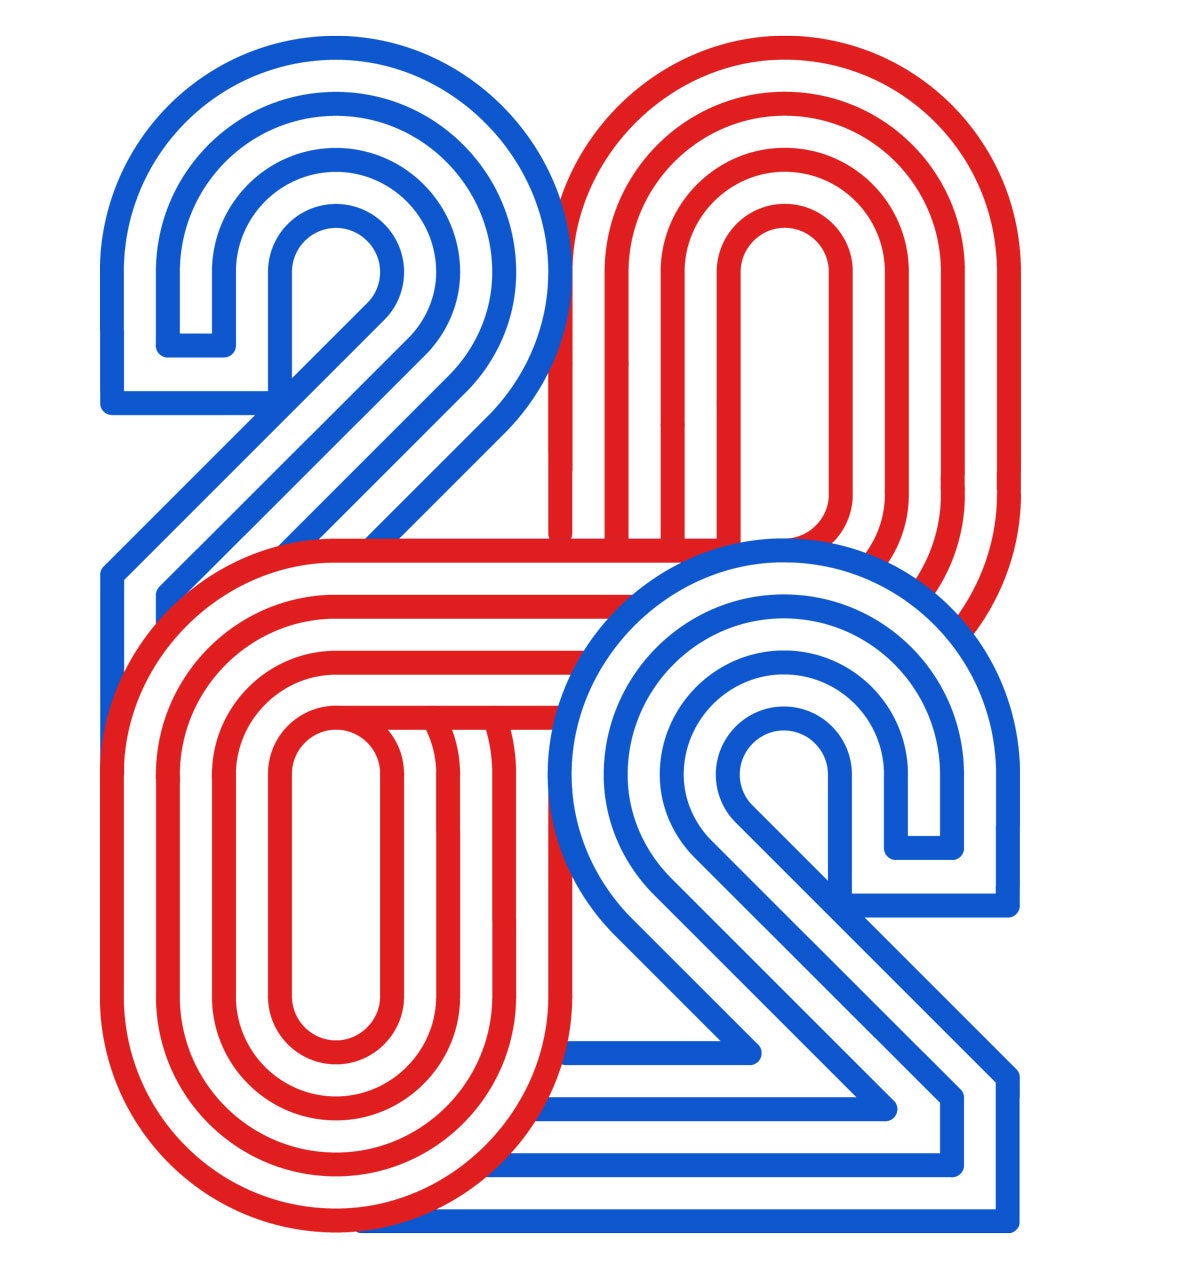 illustration of 2020 in red and blue